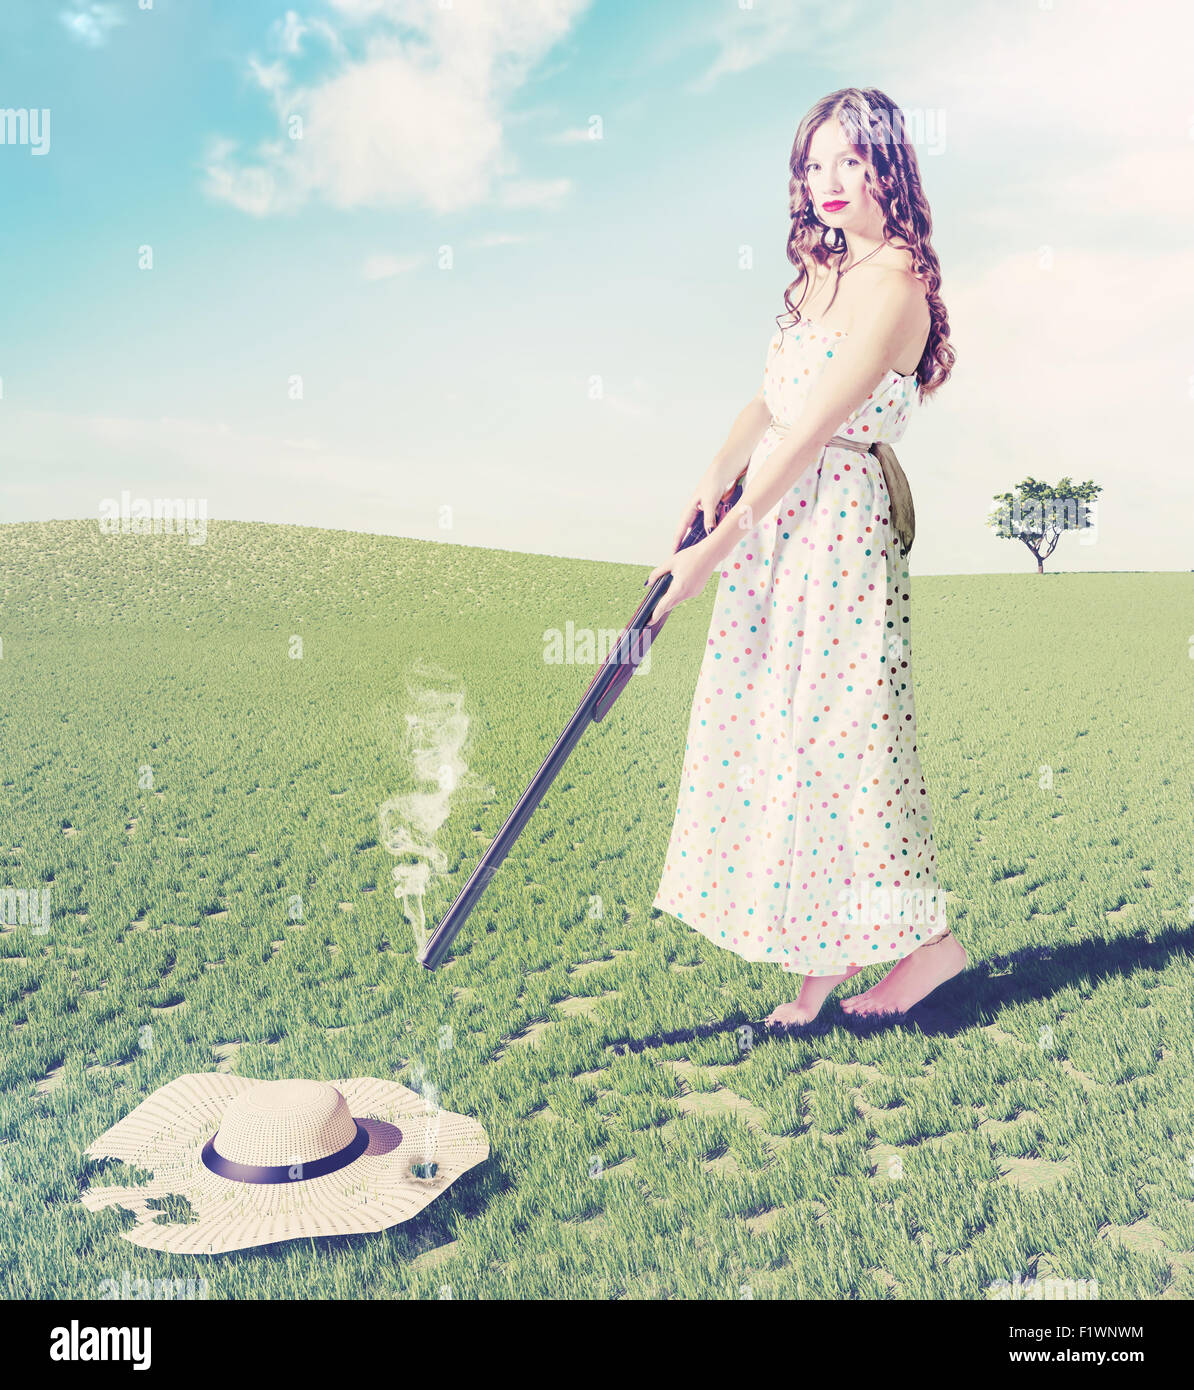 http://c8.alamy.com/comp/F1WNWM/beautiful-young-girl-shot-a-flying-hat-creative-concept-photo-and-F1WNWM.jpg